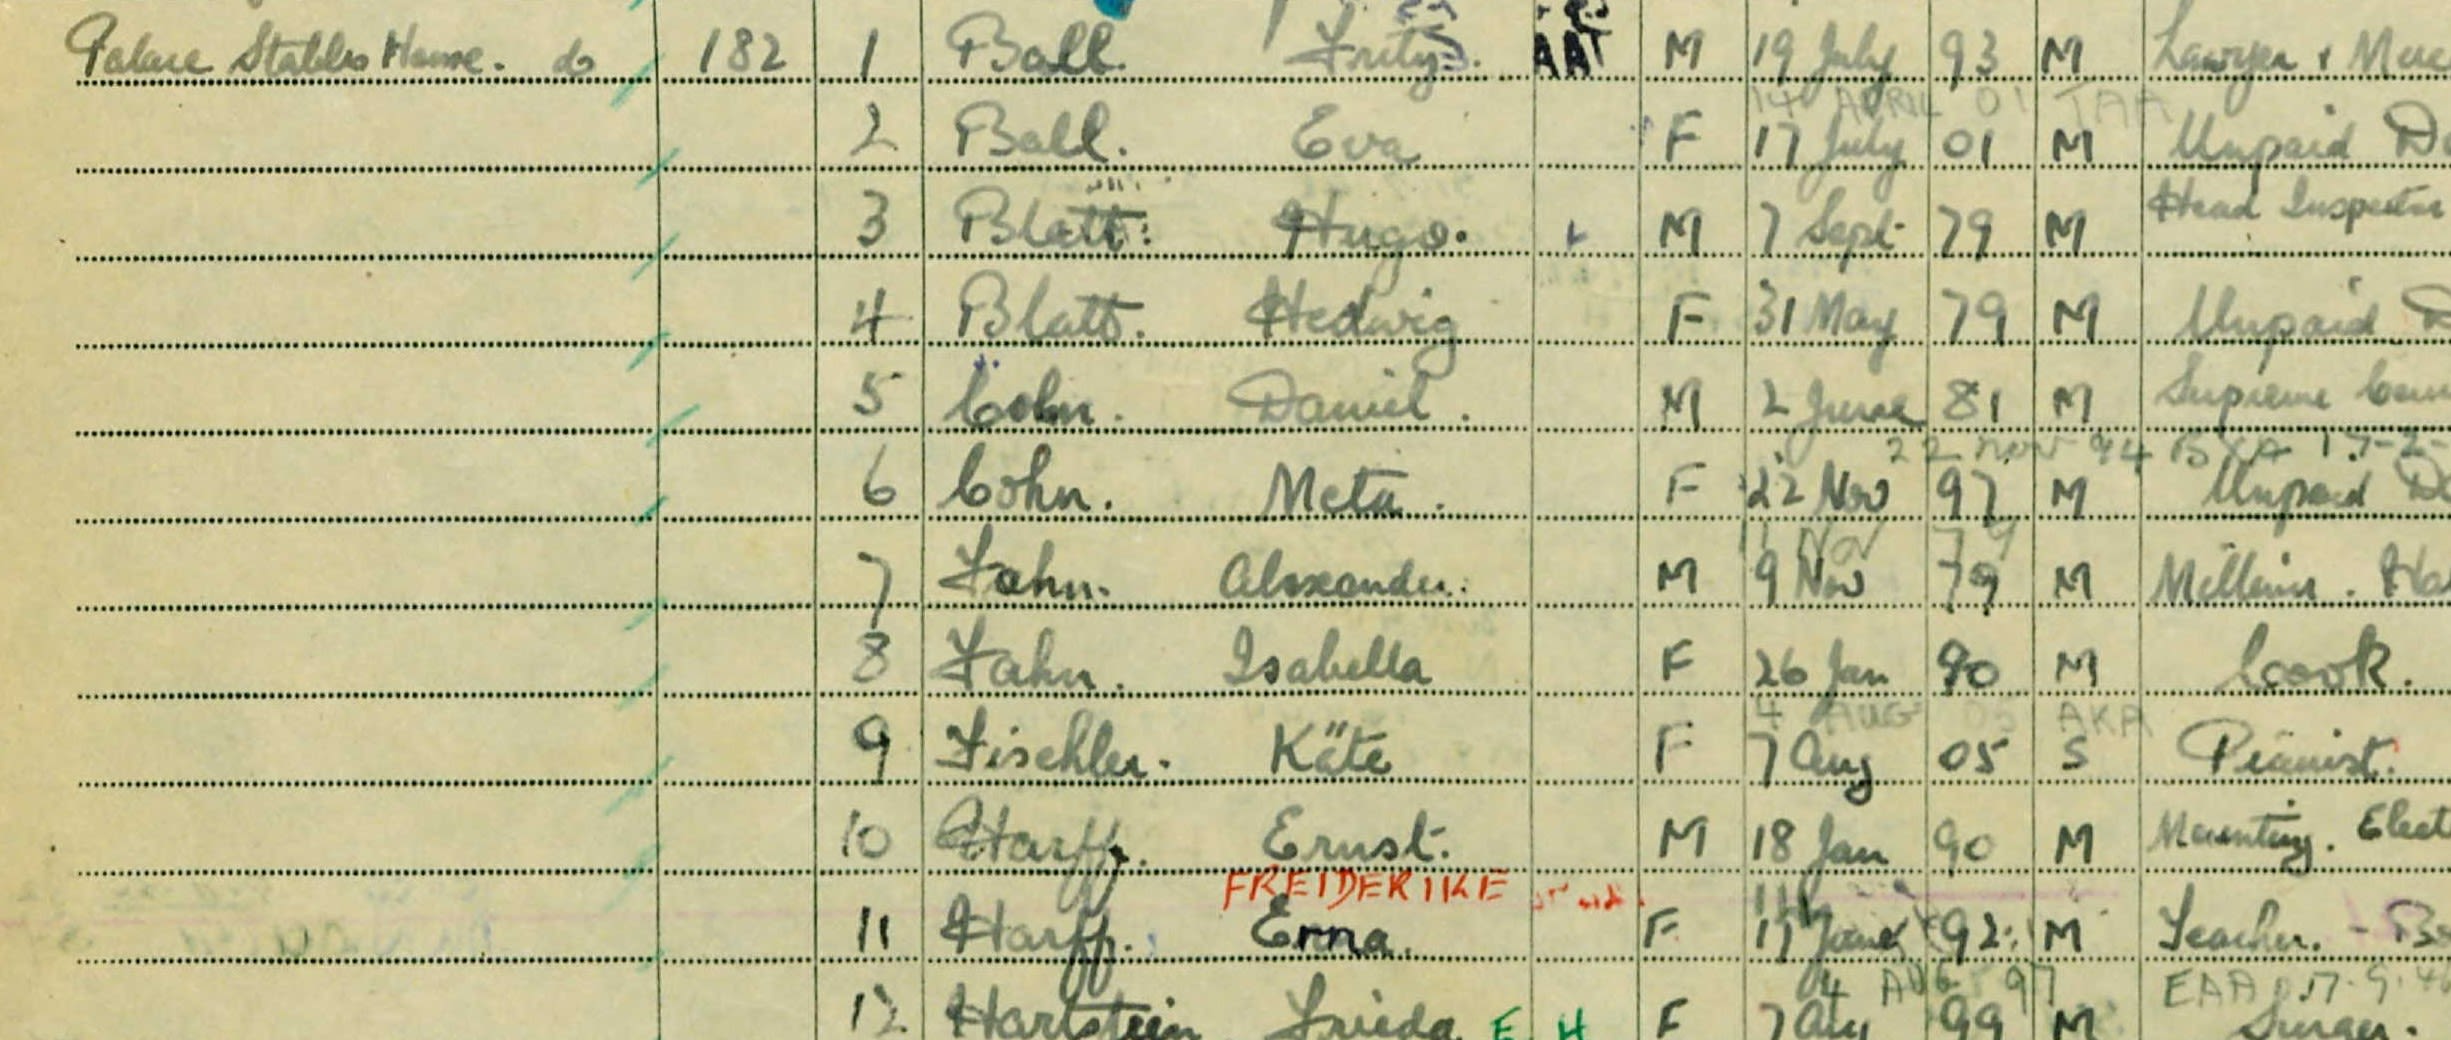 Close up view of the 1939 Register, which contains handwritten information arranged in columns. Here we can see the names of some of the people living at Palace House Stables - Hugo and Hedwig Blatt, Daniel and Meta Cohn, Alexander and Isabella Fahn, Kate Fischler, and Ernst Harff.